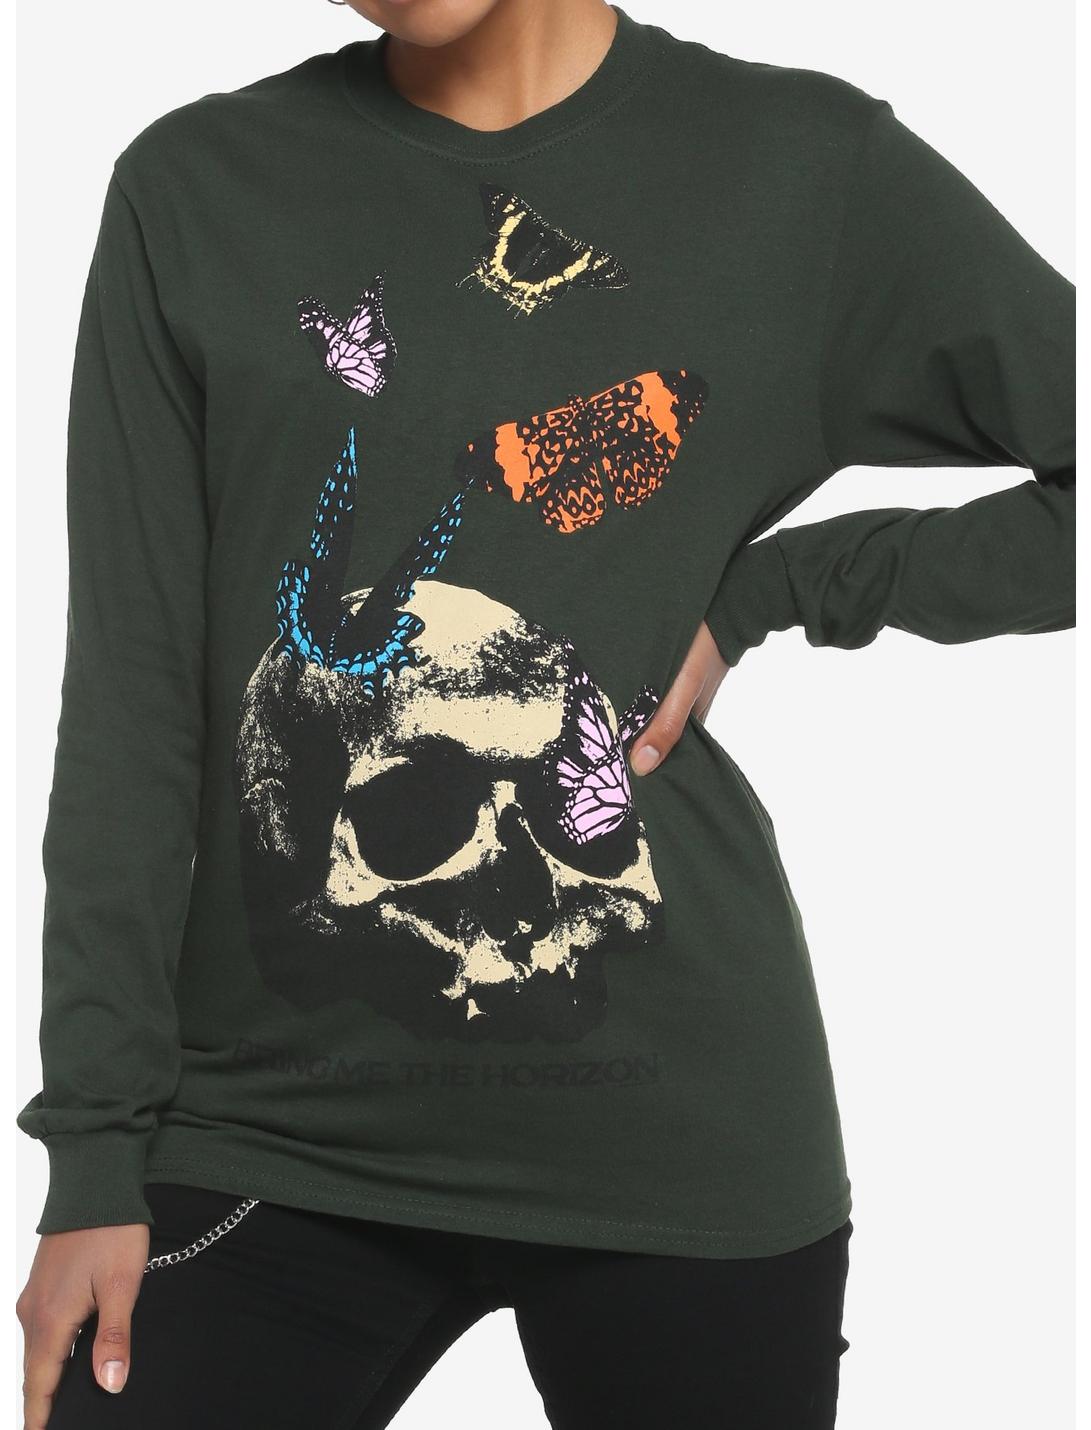 Bring Me The Horizon Butterfly Skull Girls Long-Sleeve T-Shirt, FOREST GREEN, hi-res